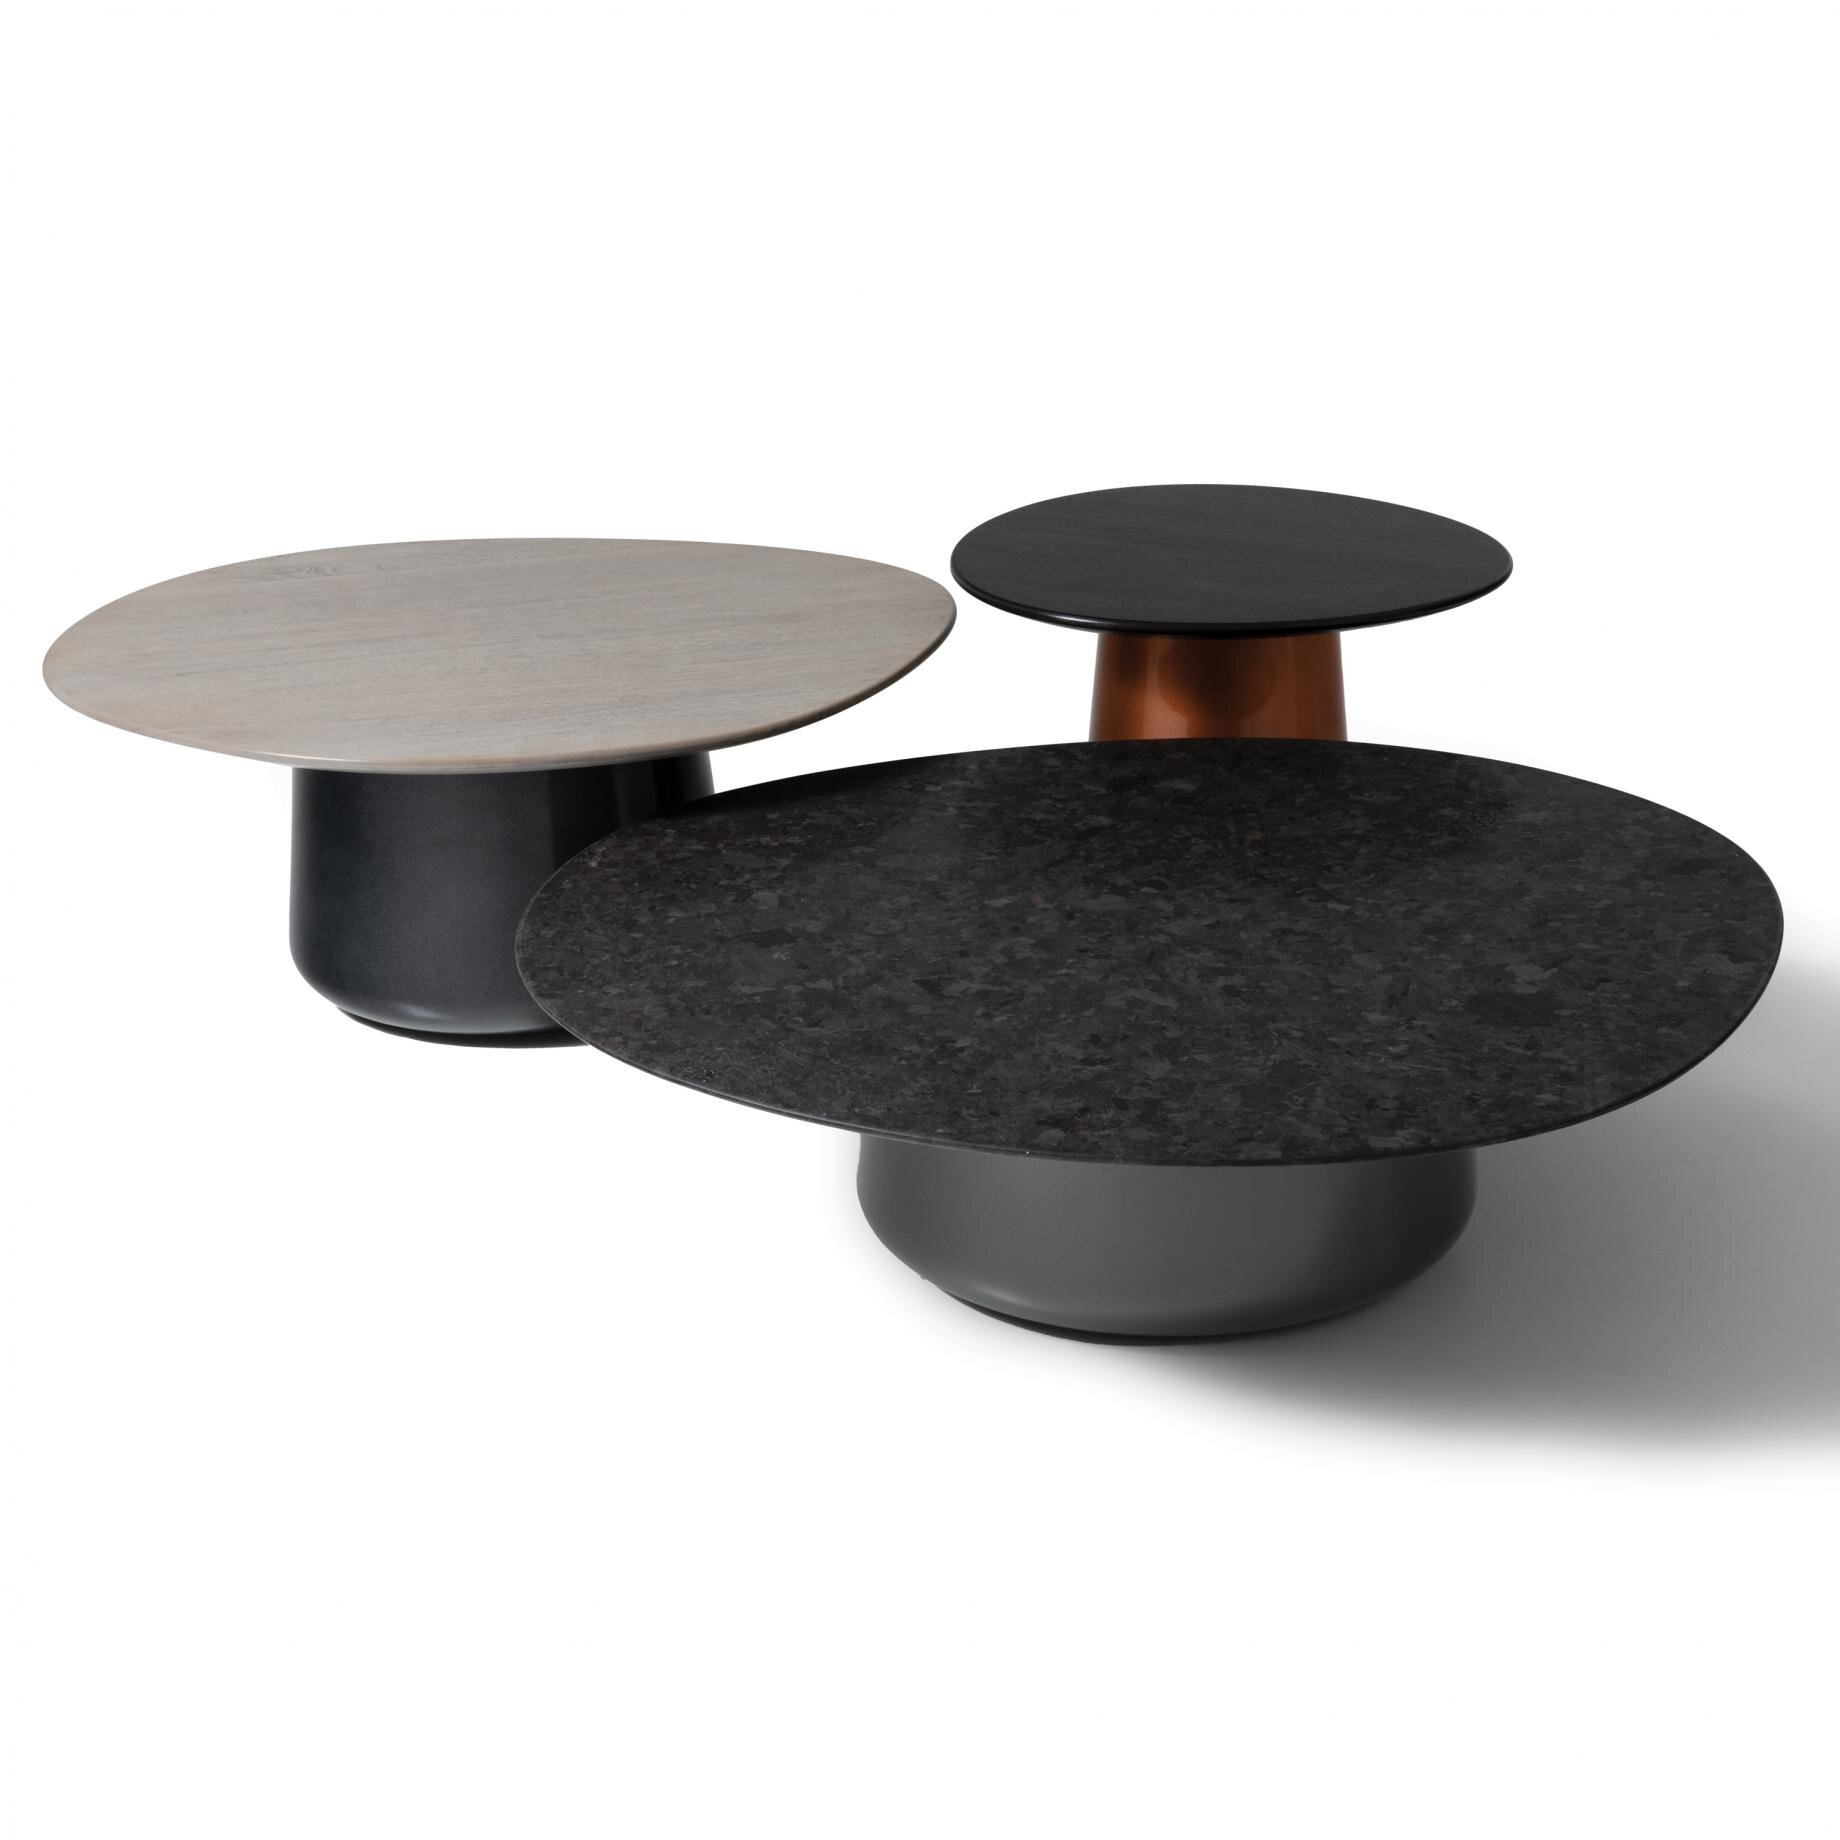 Holly Hunt’s organic Satellite Tables